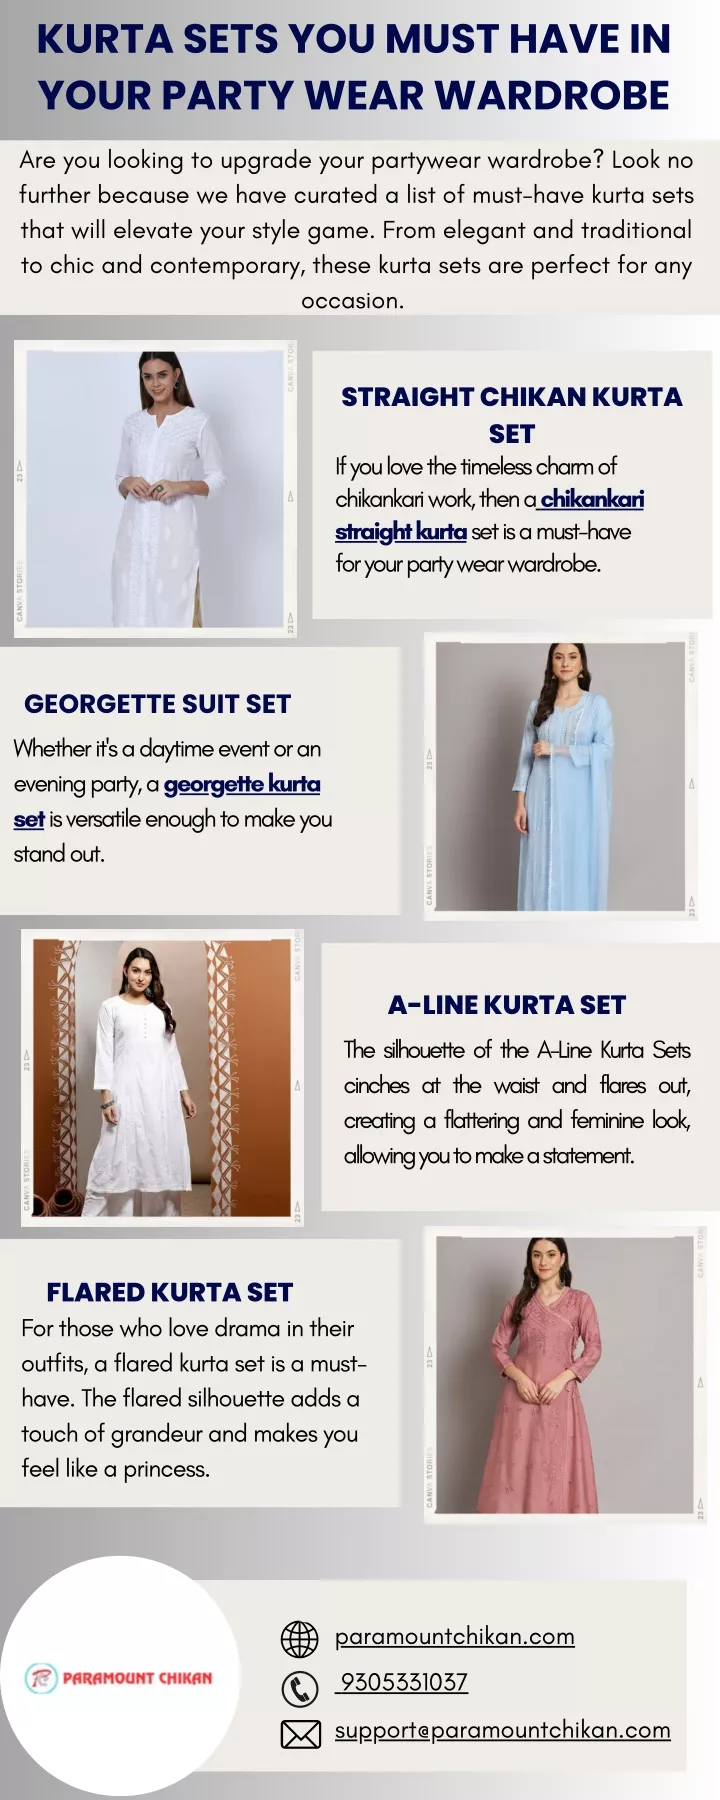 kurta sets you must have in your party wear